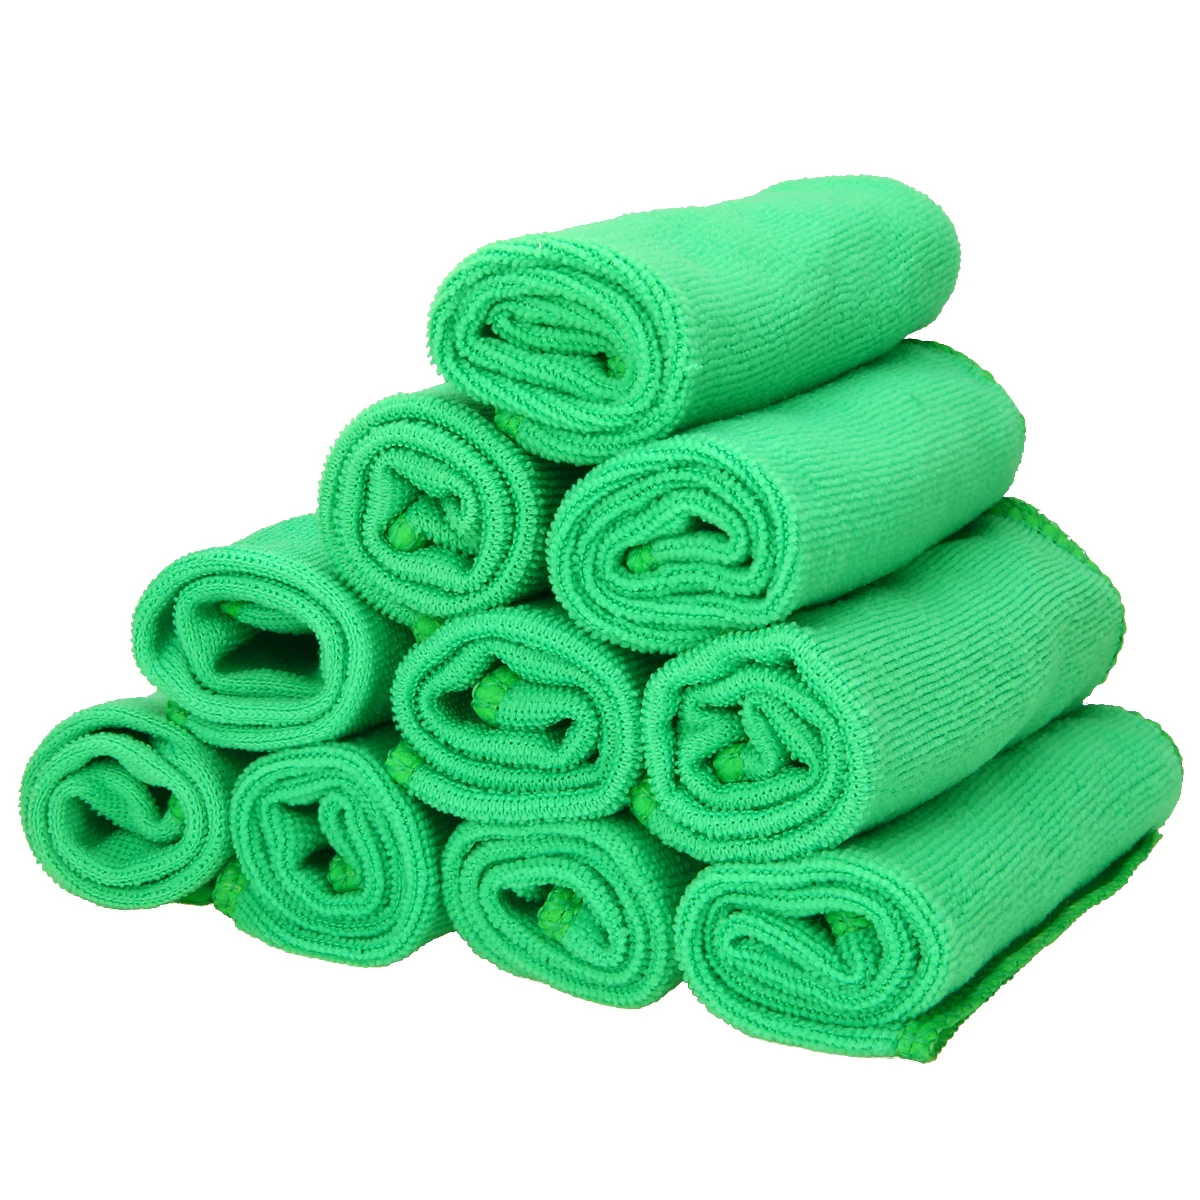 Green Microfiber Cleaning Auto Car Detailing Soft Clothes Wash Towel-Duster Z1A7 